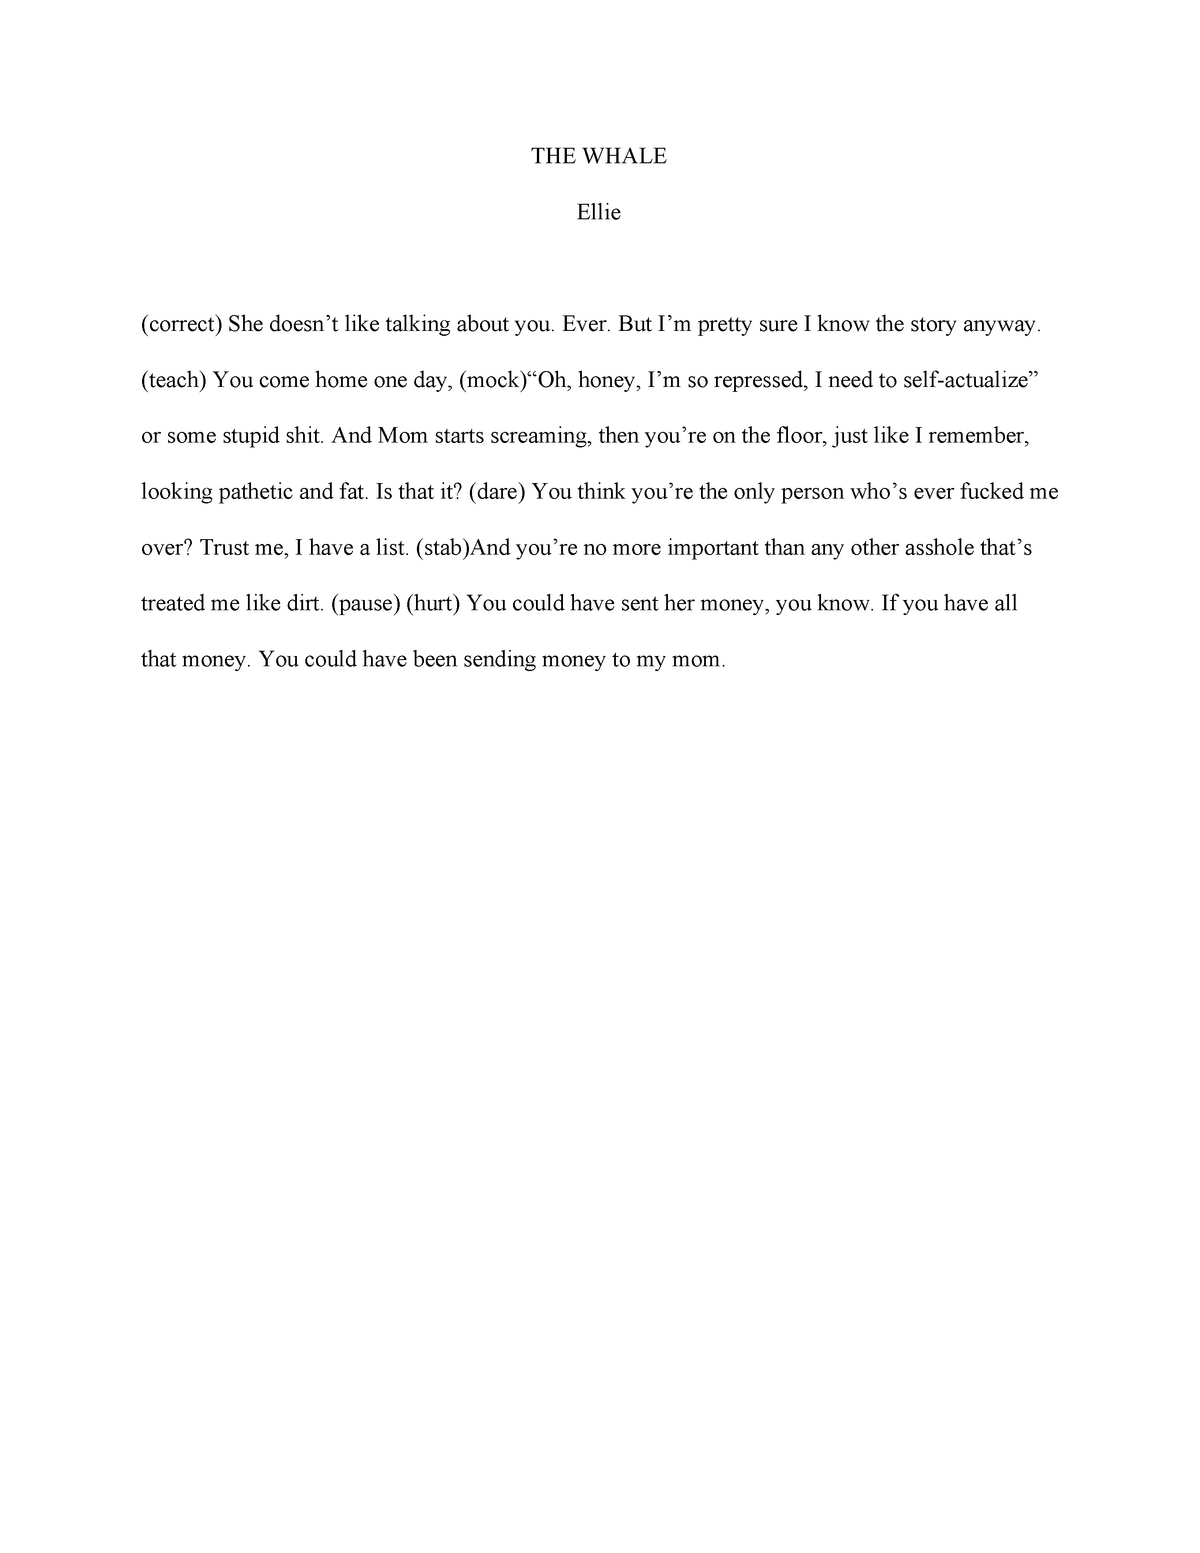 ellie's essay the whale meaning